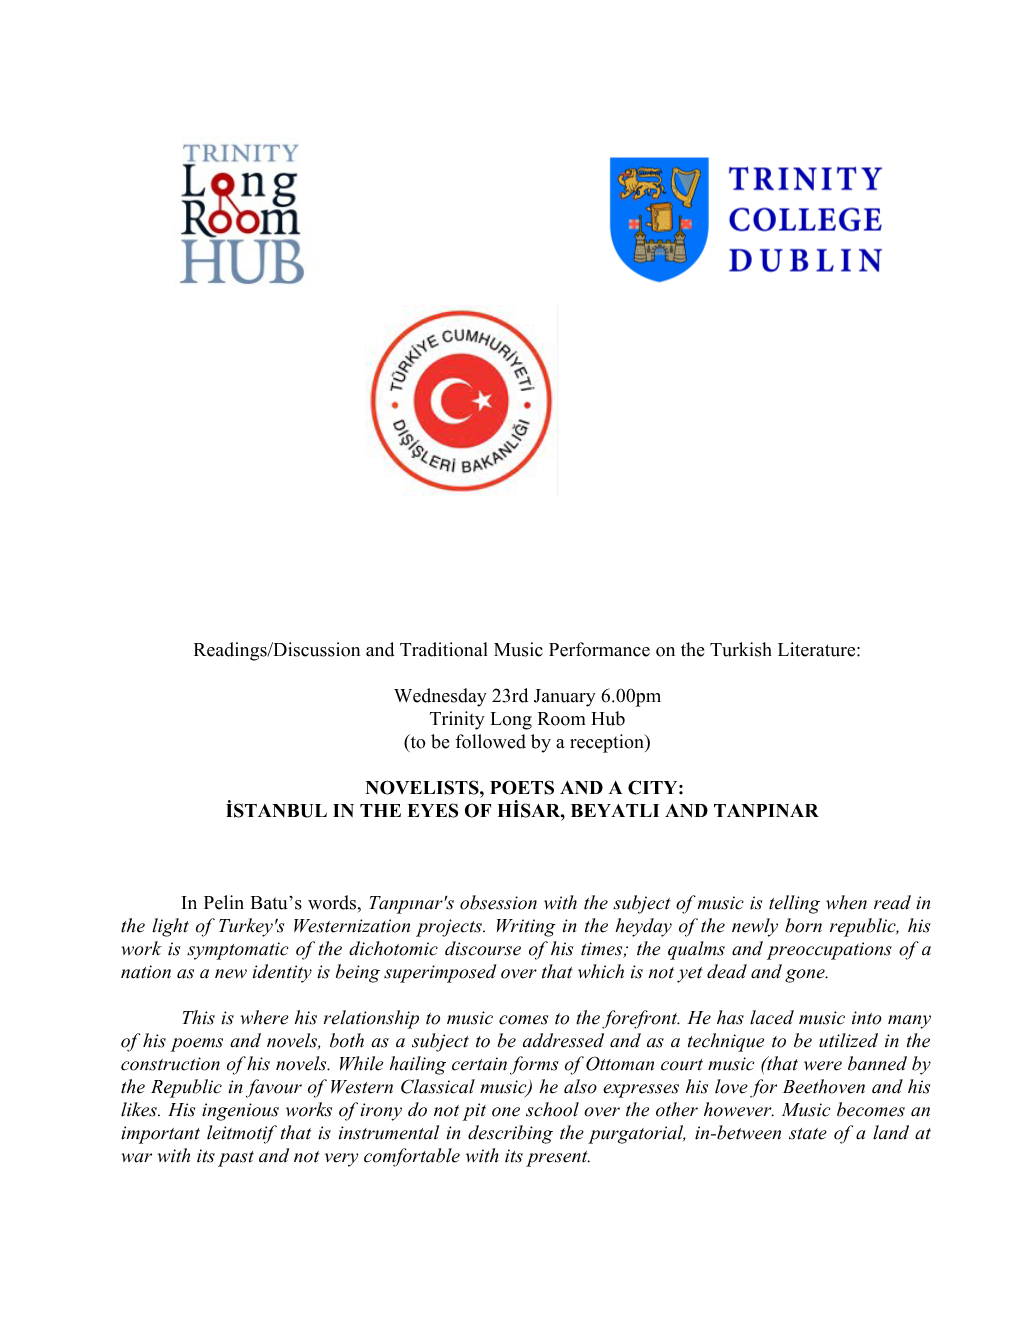 Readings/Discussion and Traditional Music Performance on the Turkish Literature